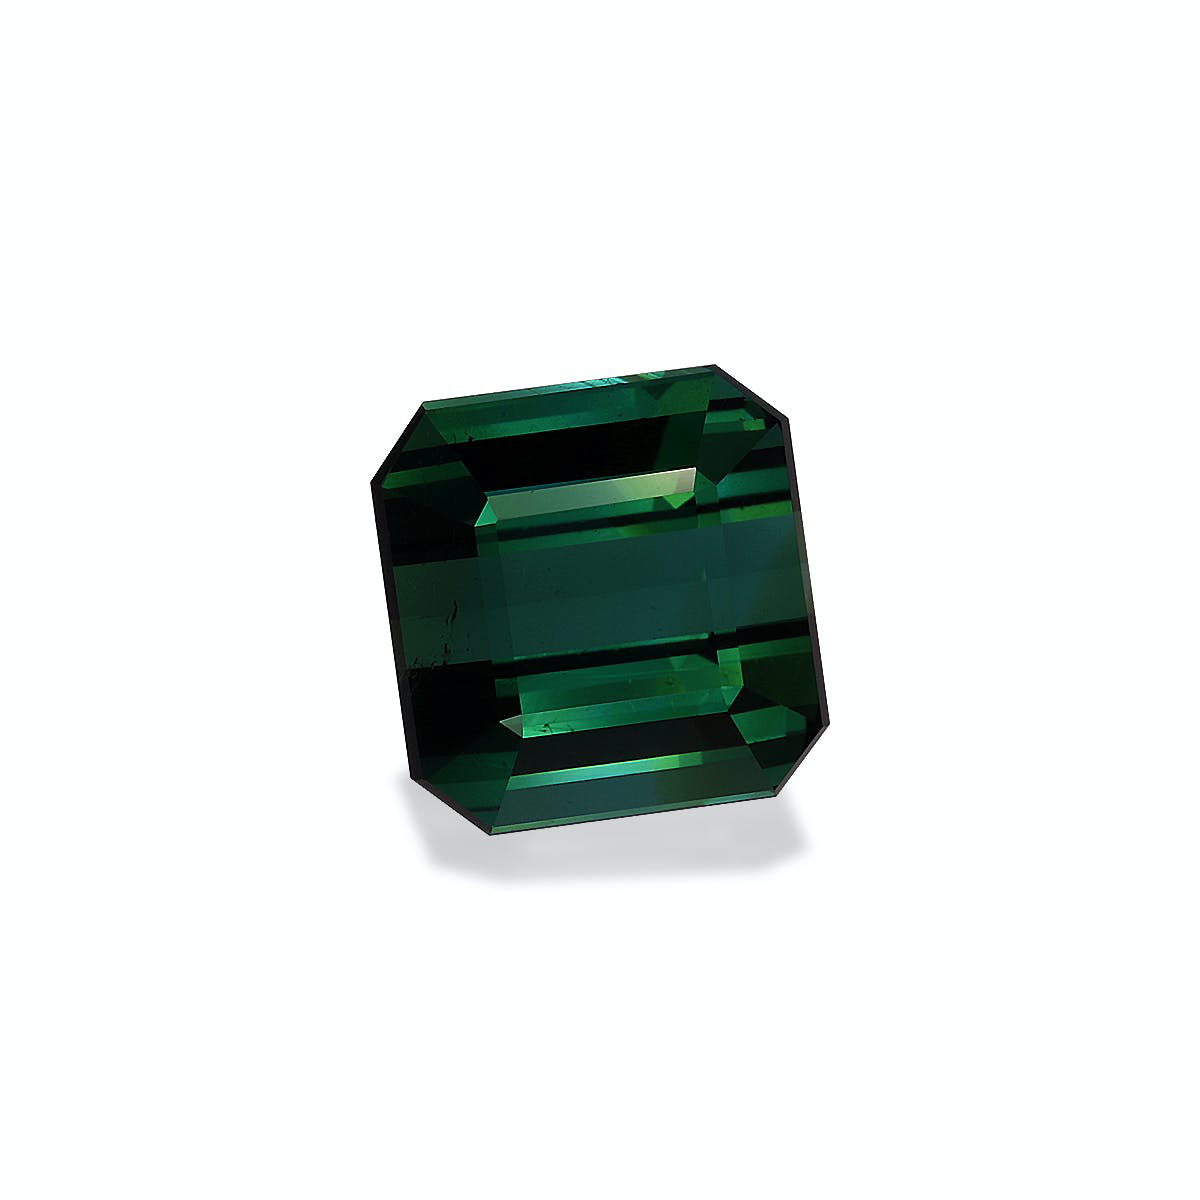 Picture of Vivid Green Tourmaline 14.15ct - 12mm (TG0320)